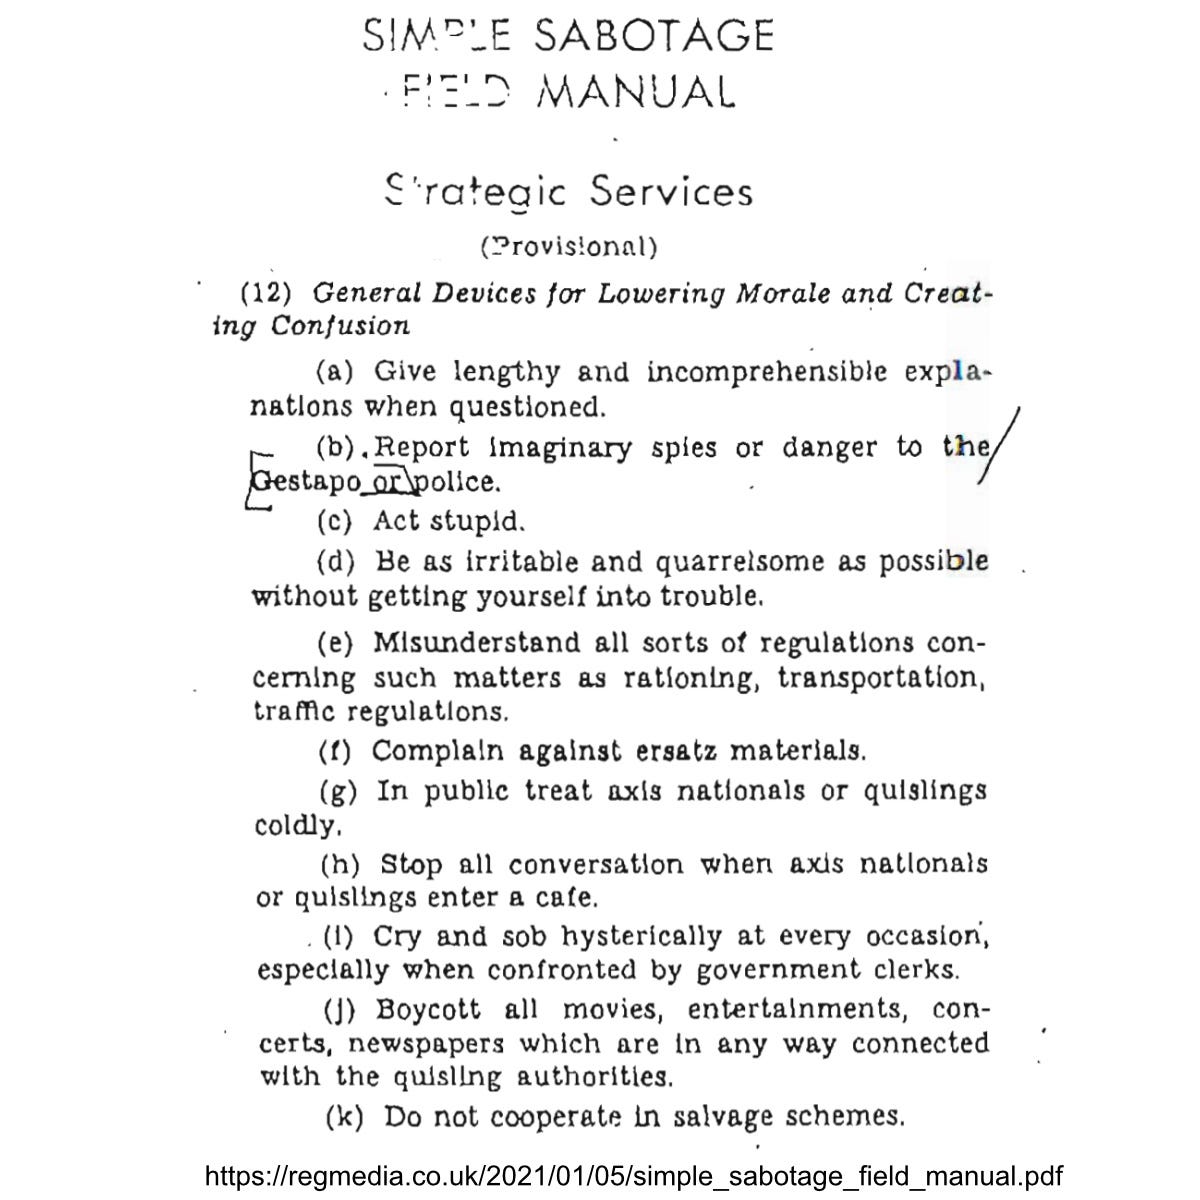 Simple Sabotage Field Manual Strategic Services (provisional)  (12) General Devices for Lowering Morale and Creating Confusion  (a) Give lengthy and incomprehensible explanations when questioned.  (b) Report imaginary spies or danger to the Gestapo or police (c) Act stupid (d) Be as irritable and quarrelsome as possible without getting yourself into trouble. (e) Misunderstand all sorts of regulations concerning such matters as rationing, transportation, traffic regulations (f) Complain against ersatz materials (g) In public treat axis nationals or quislings coldly (h) stop all conversation when axis nationals or quislings enter a cafe (i) Cry and sob hysterically at every occasion, especially when confronted by government clerks (j) Boycott all movies, entertainments, concerts, newspapers which are in any way connected with the quisling authorities (k) Do not cooperate in salvage schemes.  https://regmedia.co.uk/2021/01/05/simple_sabotage_field_manual.pdf